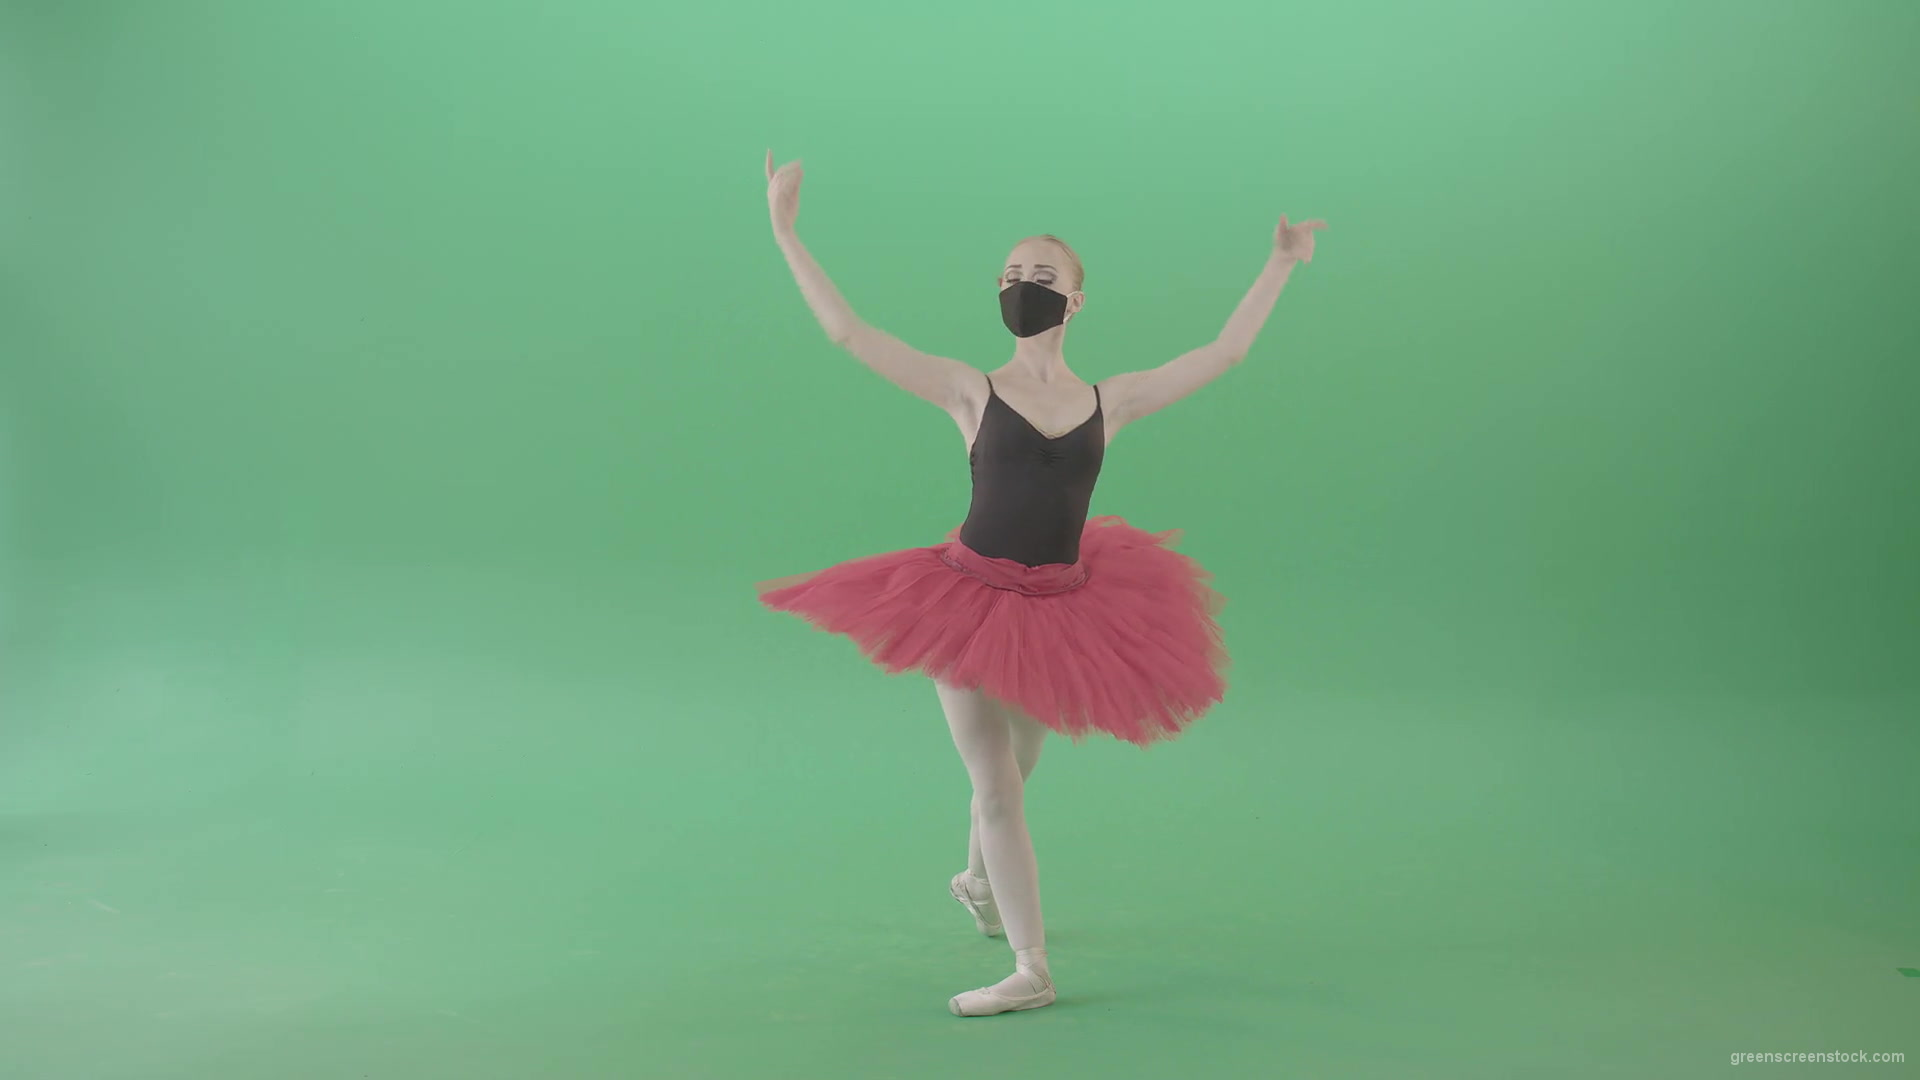 Tinny-Ballet-Dancing-Girl-Ballerina-in-red-black-dress-and-mask-welcome-people-for-awards-Green-Screen-Video-Footage-1920_007 Green Screen Stock